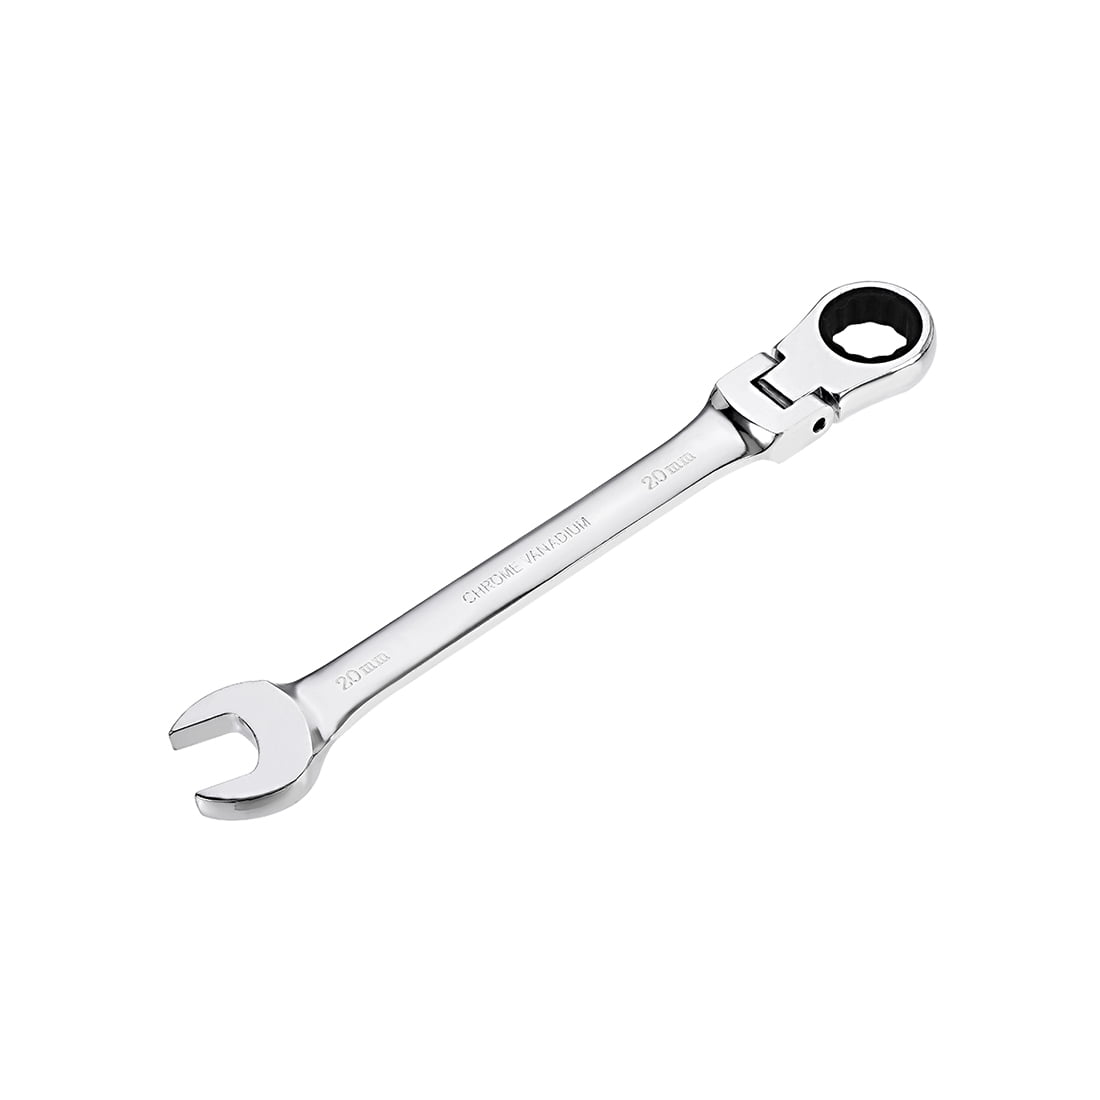 6MM-20MM Manual Dual Purpose Adjustable Head Ratchet Wrench Rotatable Tooth Gear 